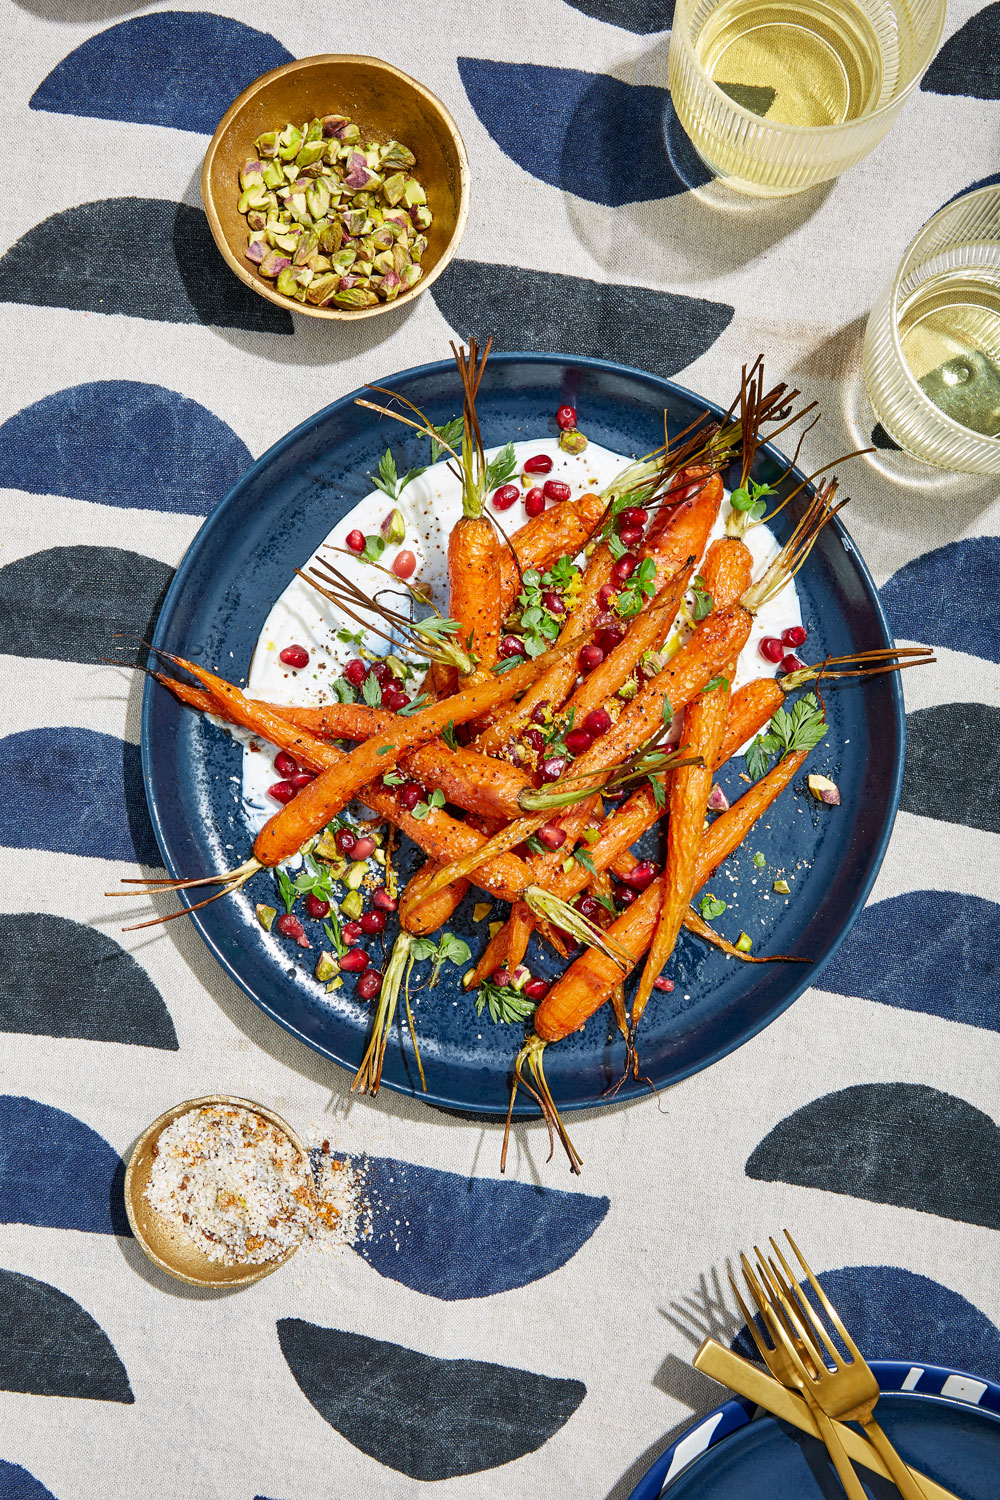 Roasted carrots with yogurt and white wines